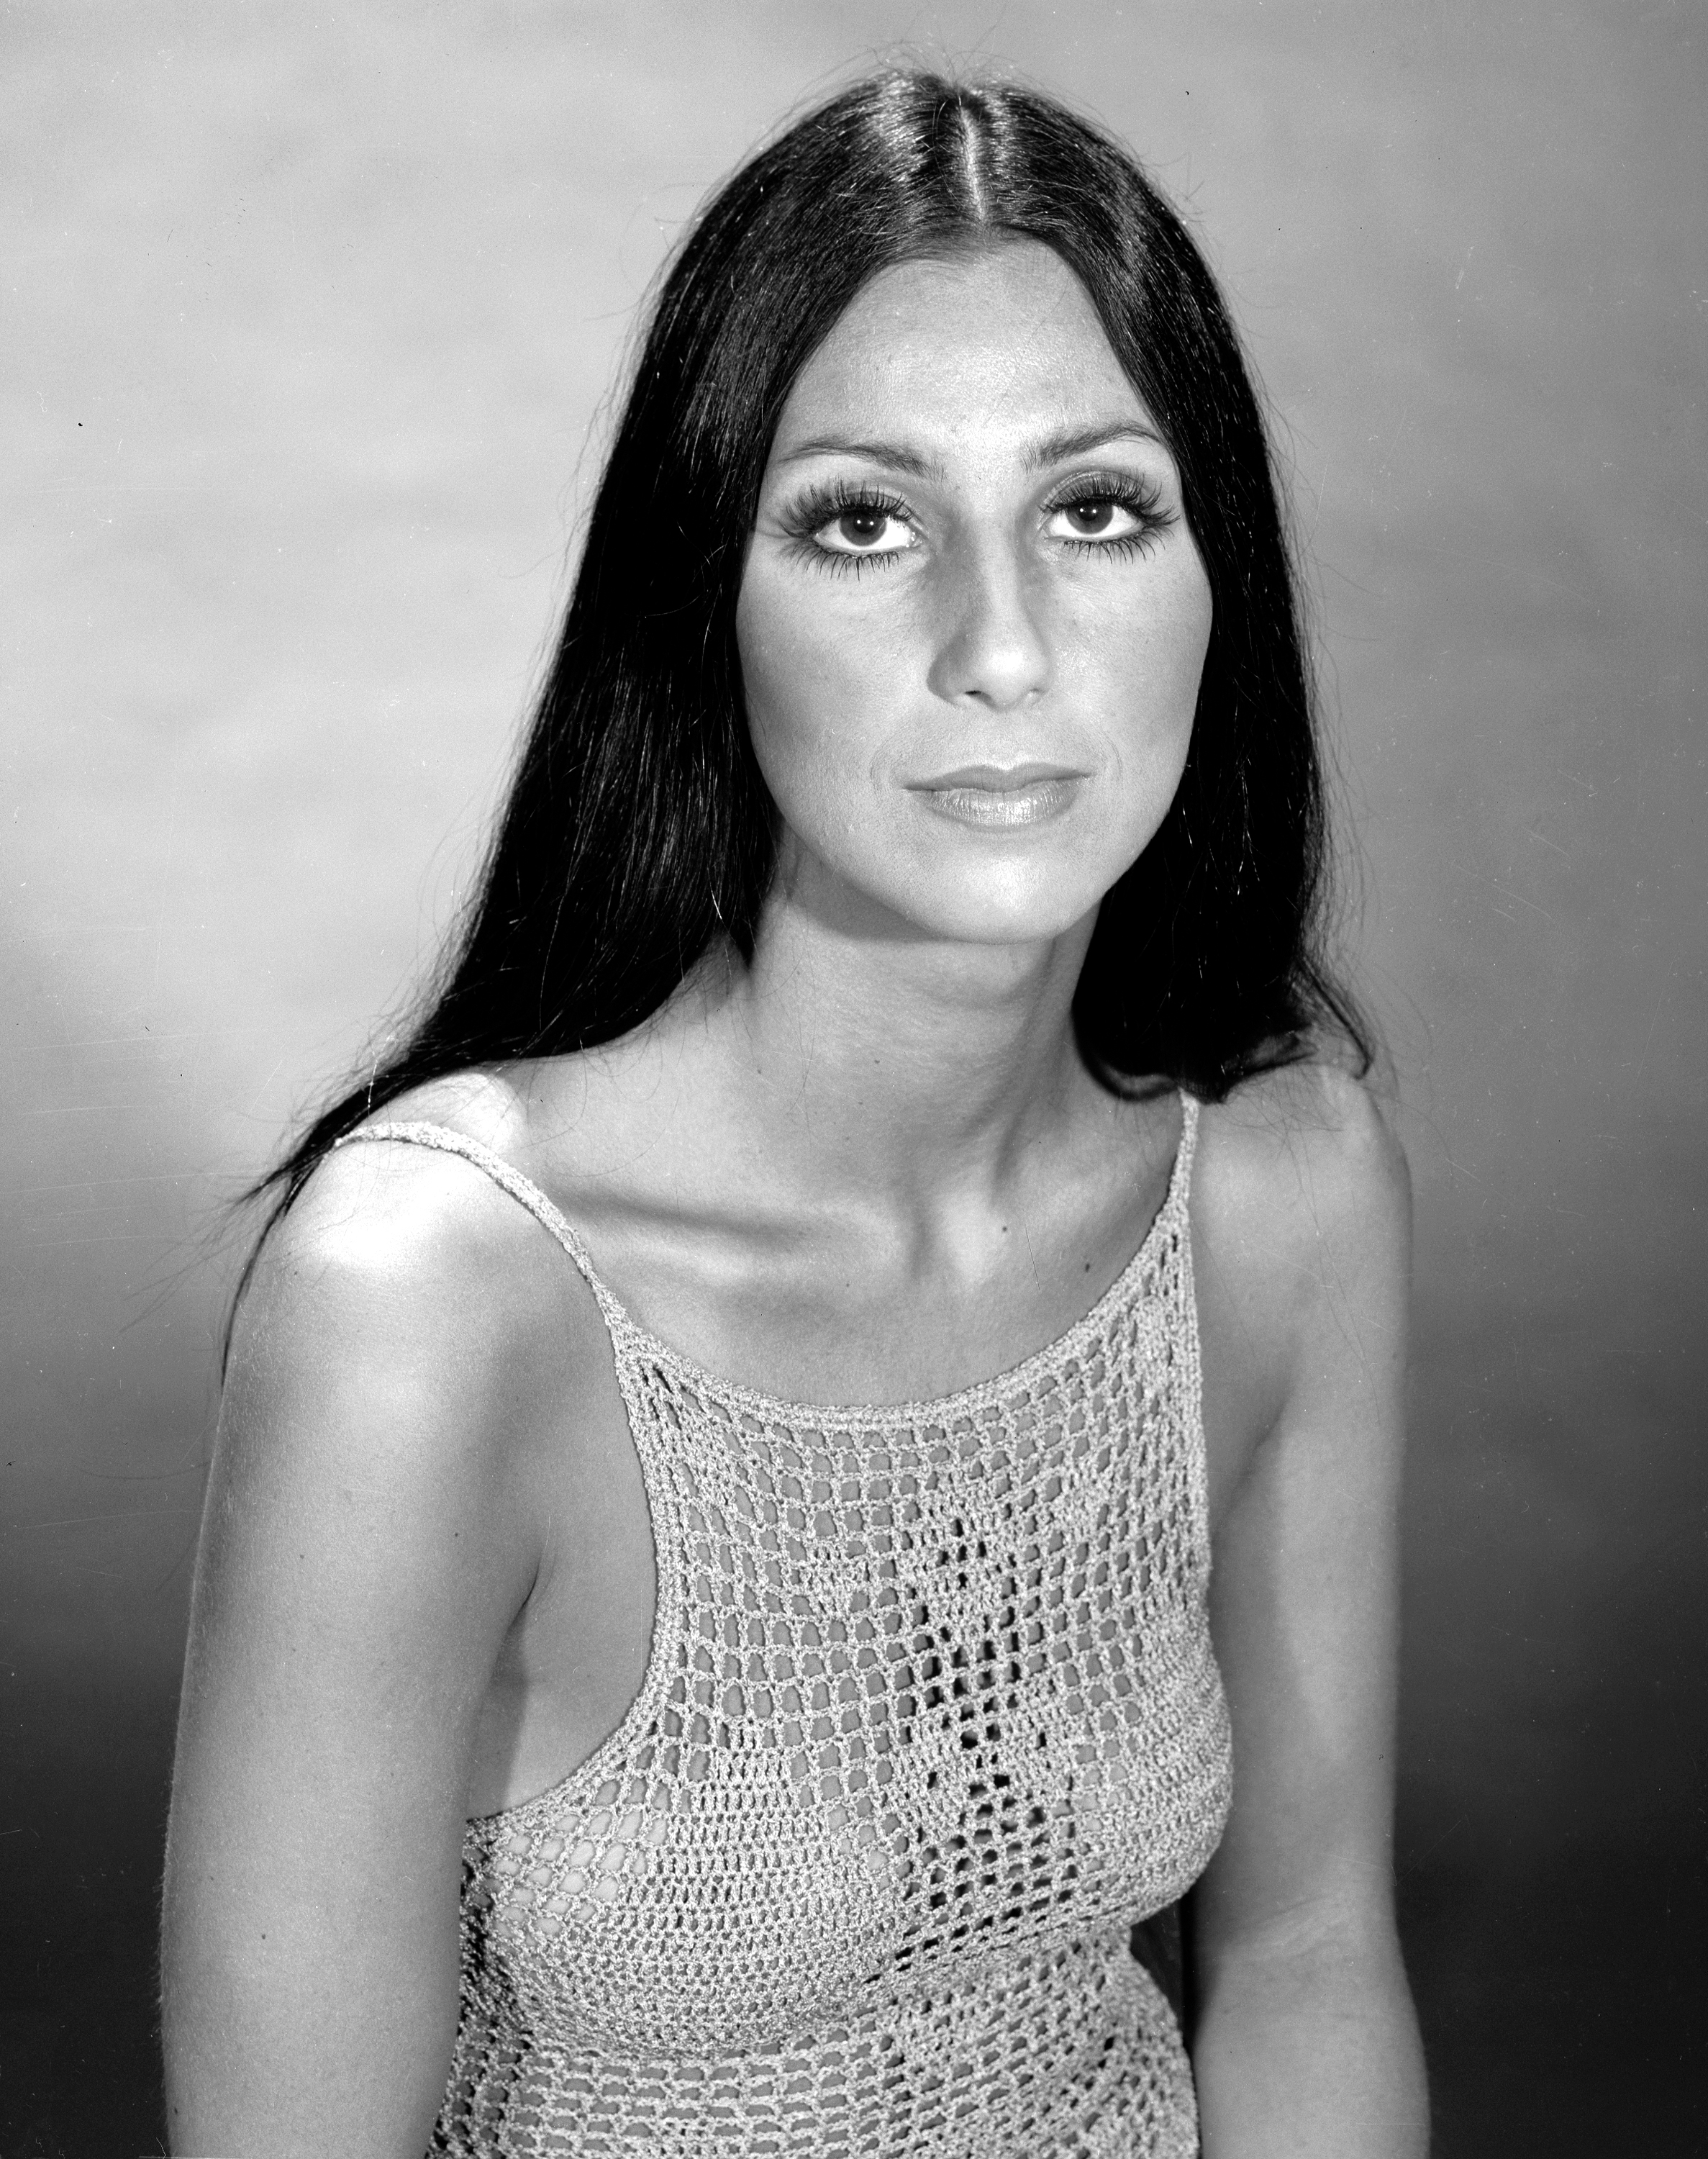 Cher on the set of "The Sonny and Cher Comedy Hour" on June 7, 1970 | Source: Getty Images